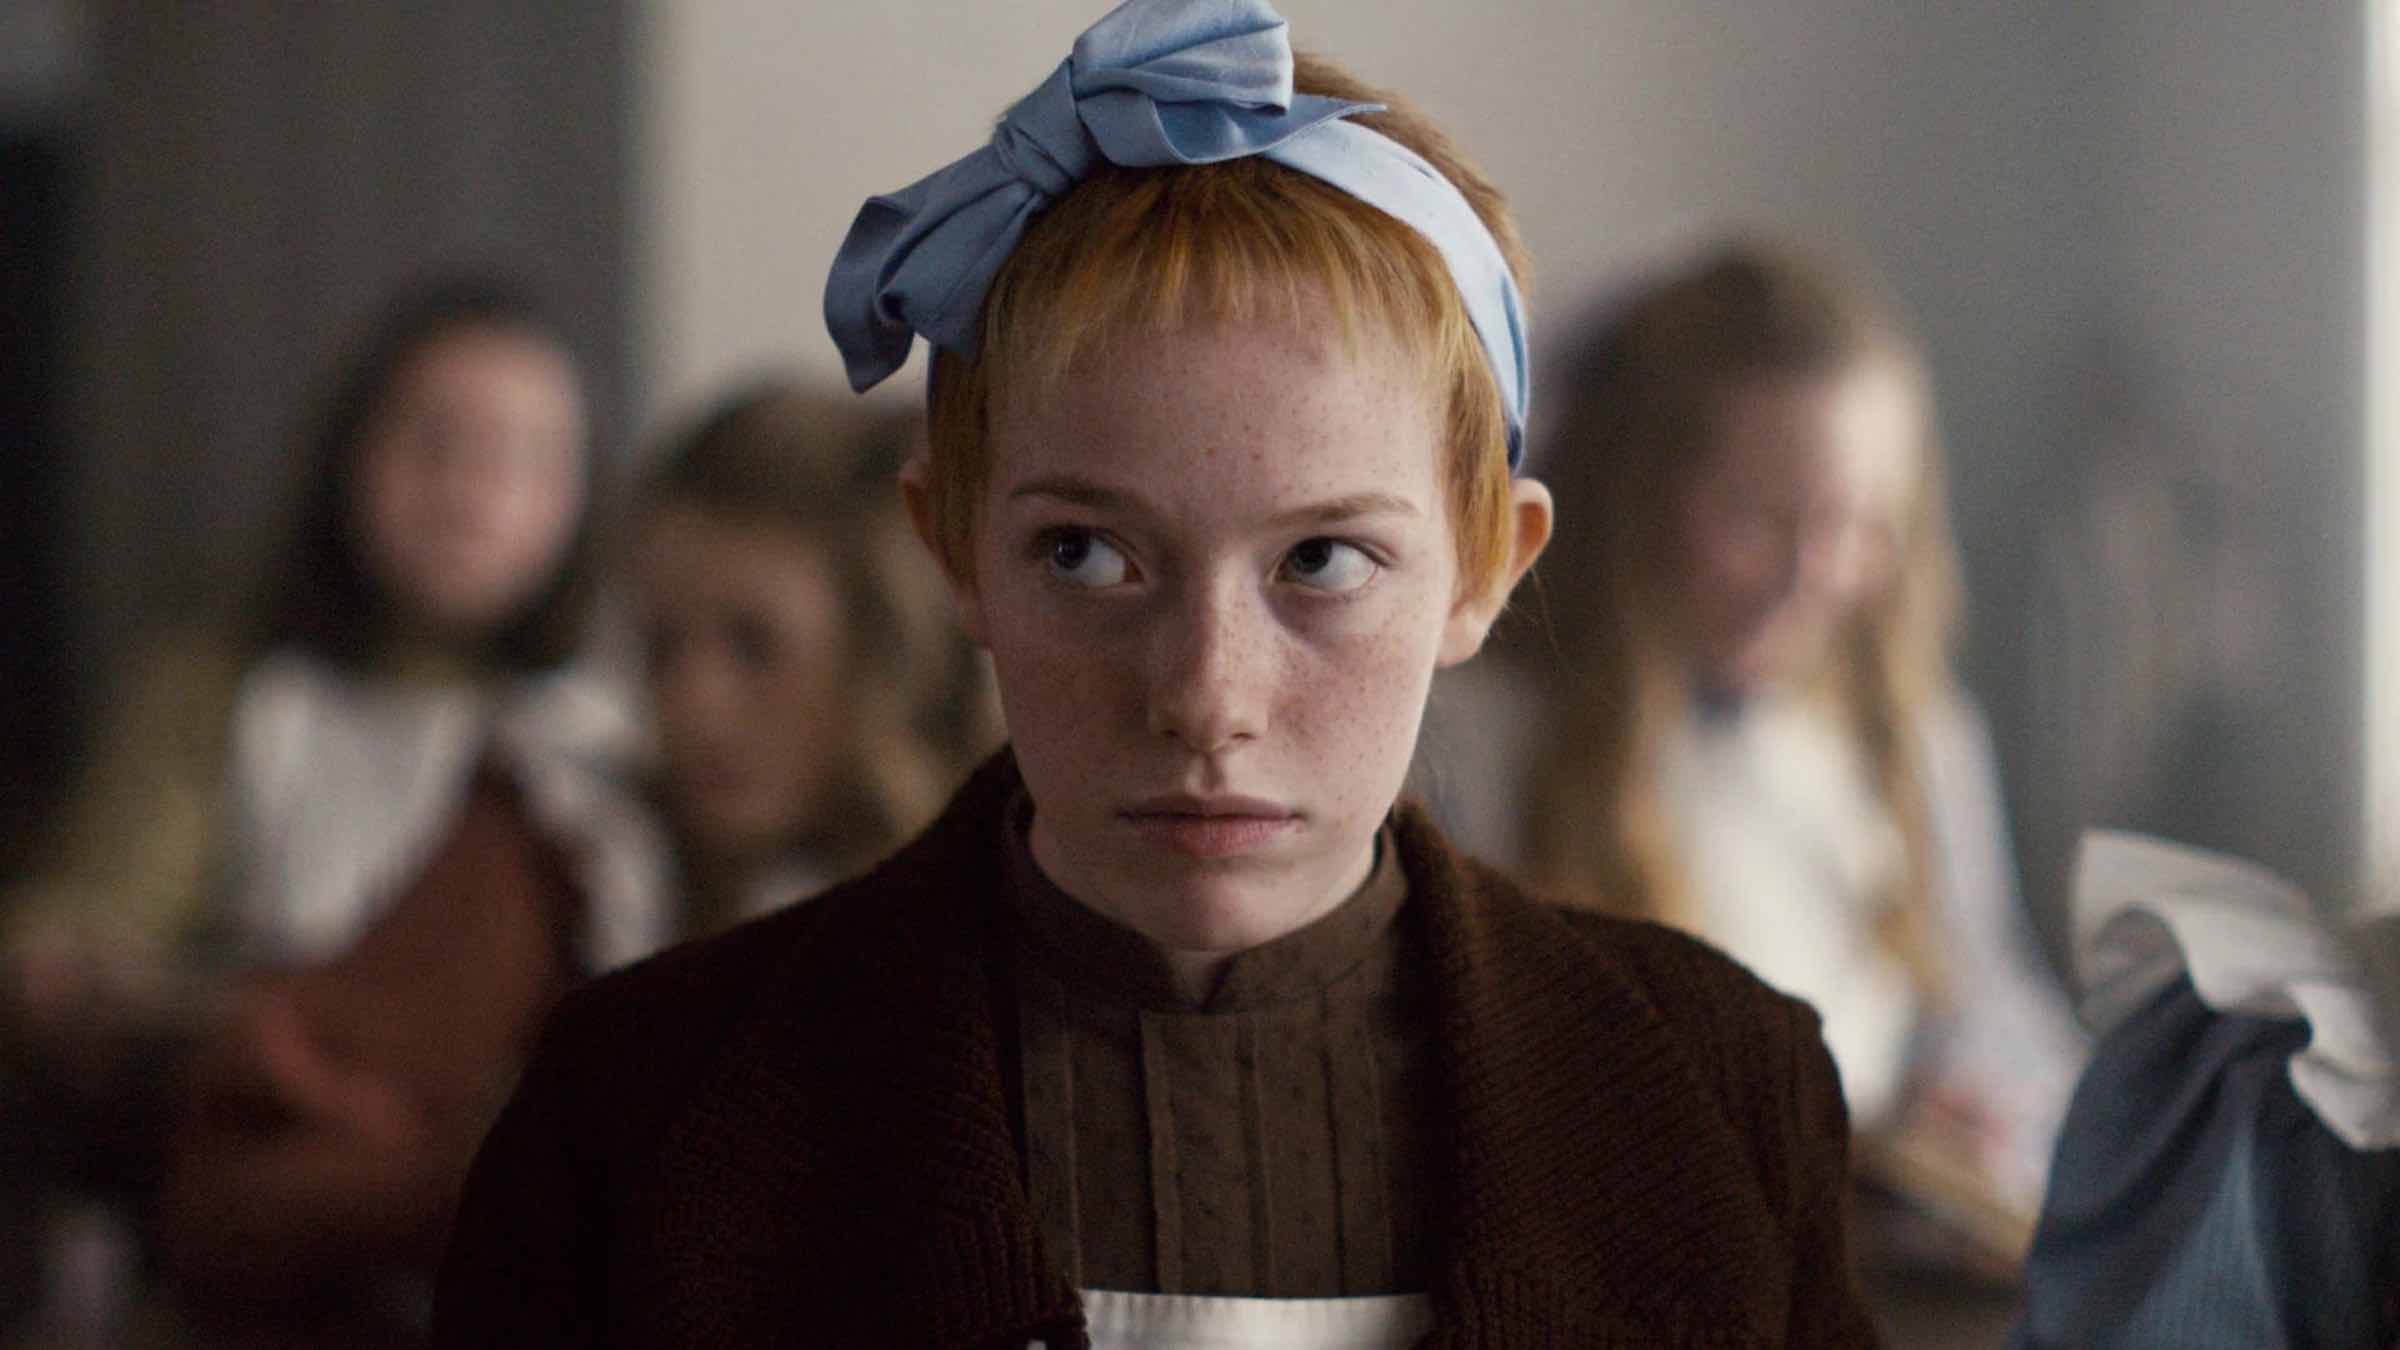 The upcoming streaming release of the third season of 'Anne with an E' is sure to be a gallant affair. We’ve put together a guide of the main characters.